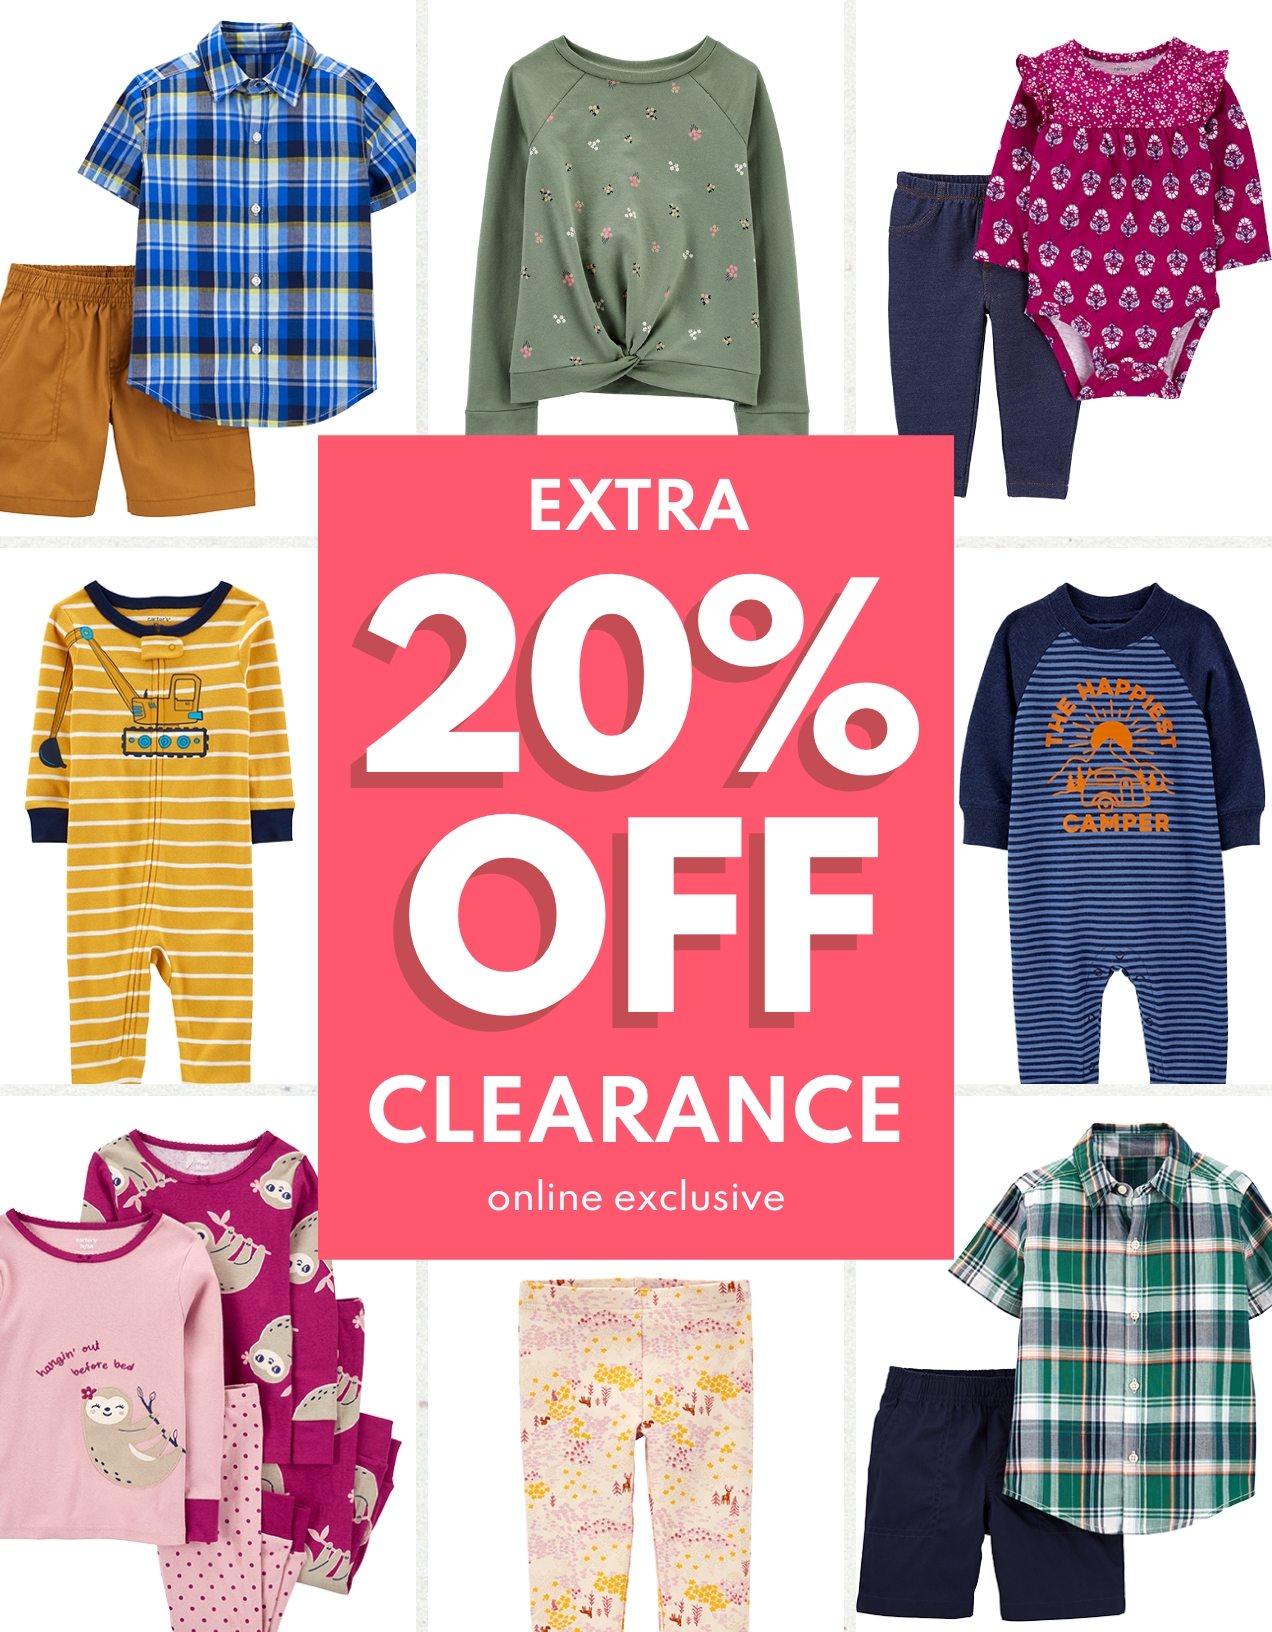 EXTRA 20% OFF CLEARANCE | online exclusive 